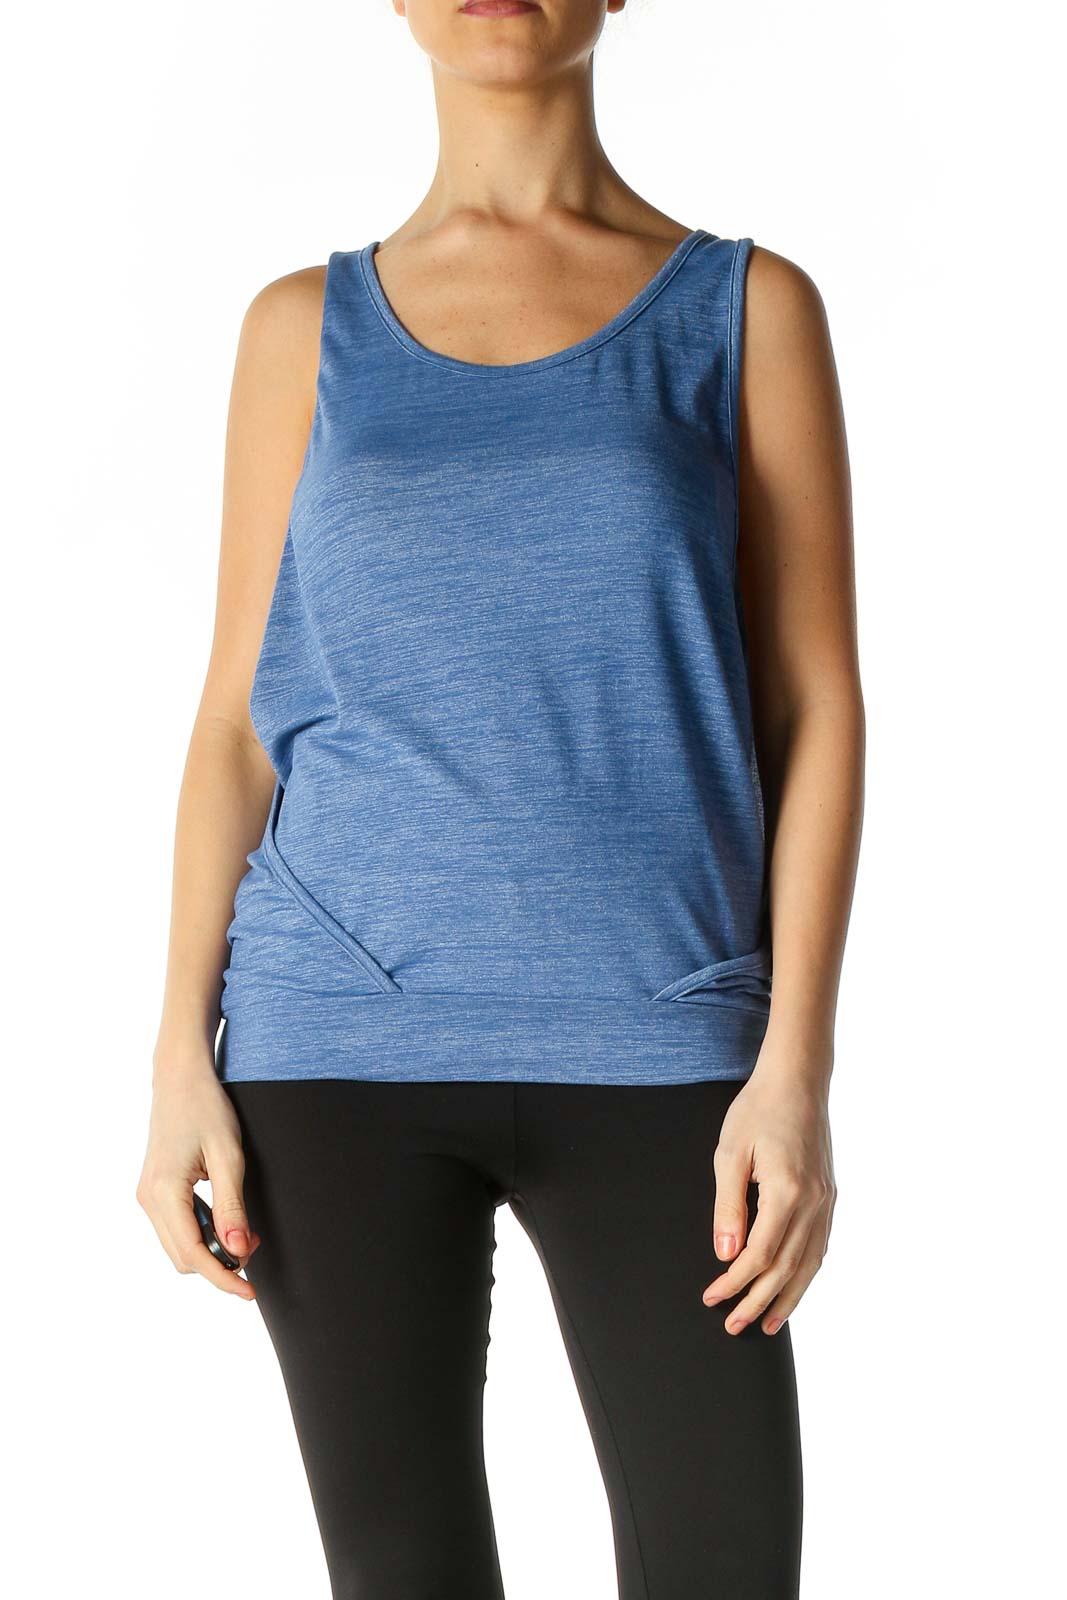 Blue Solid Casual Tank Top Front